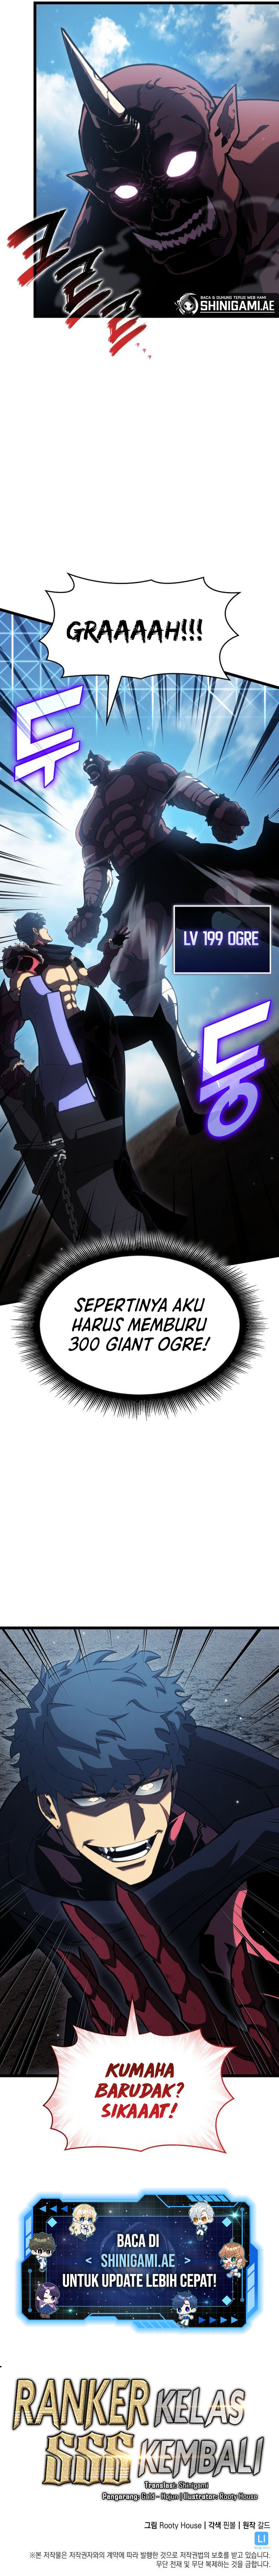 return-of-the-sss-class-ranker-indo Chapter 93